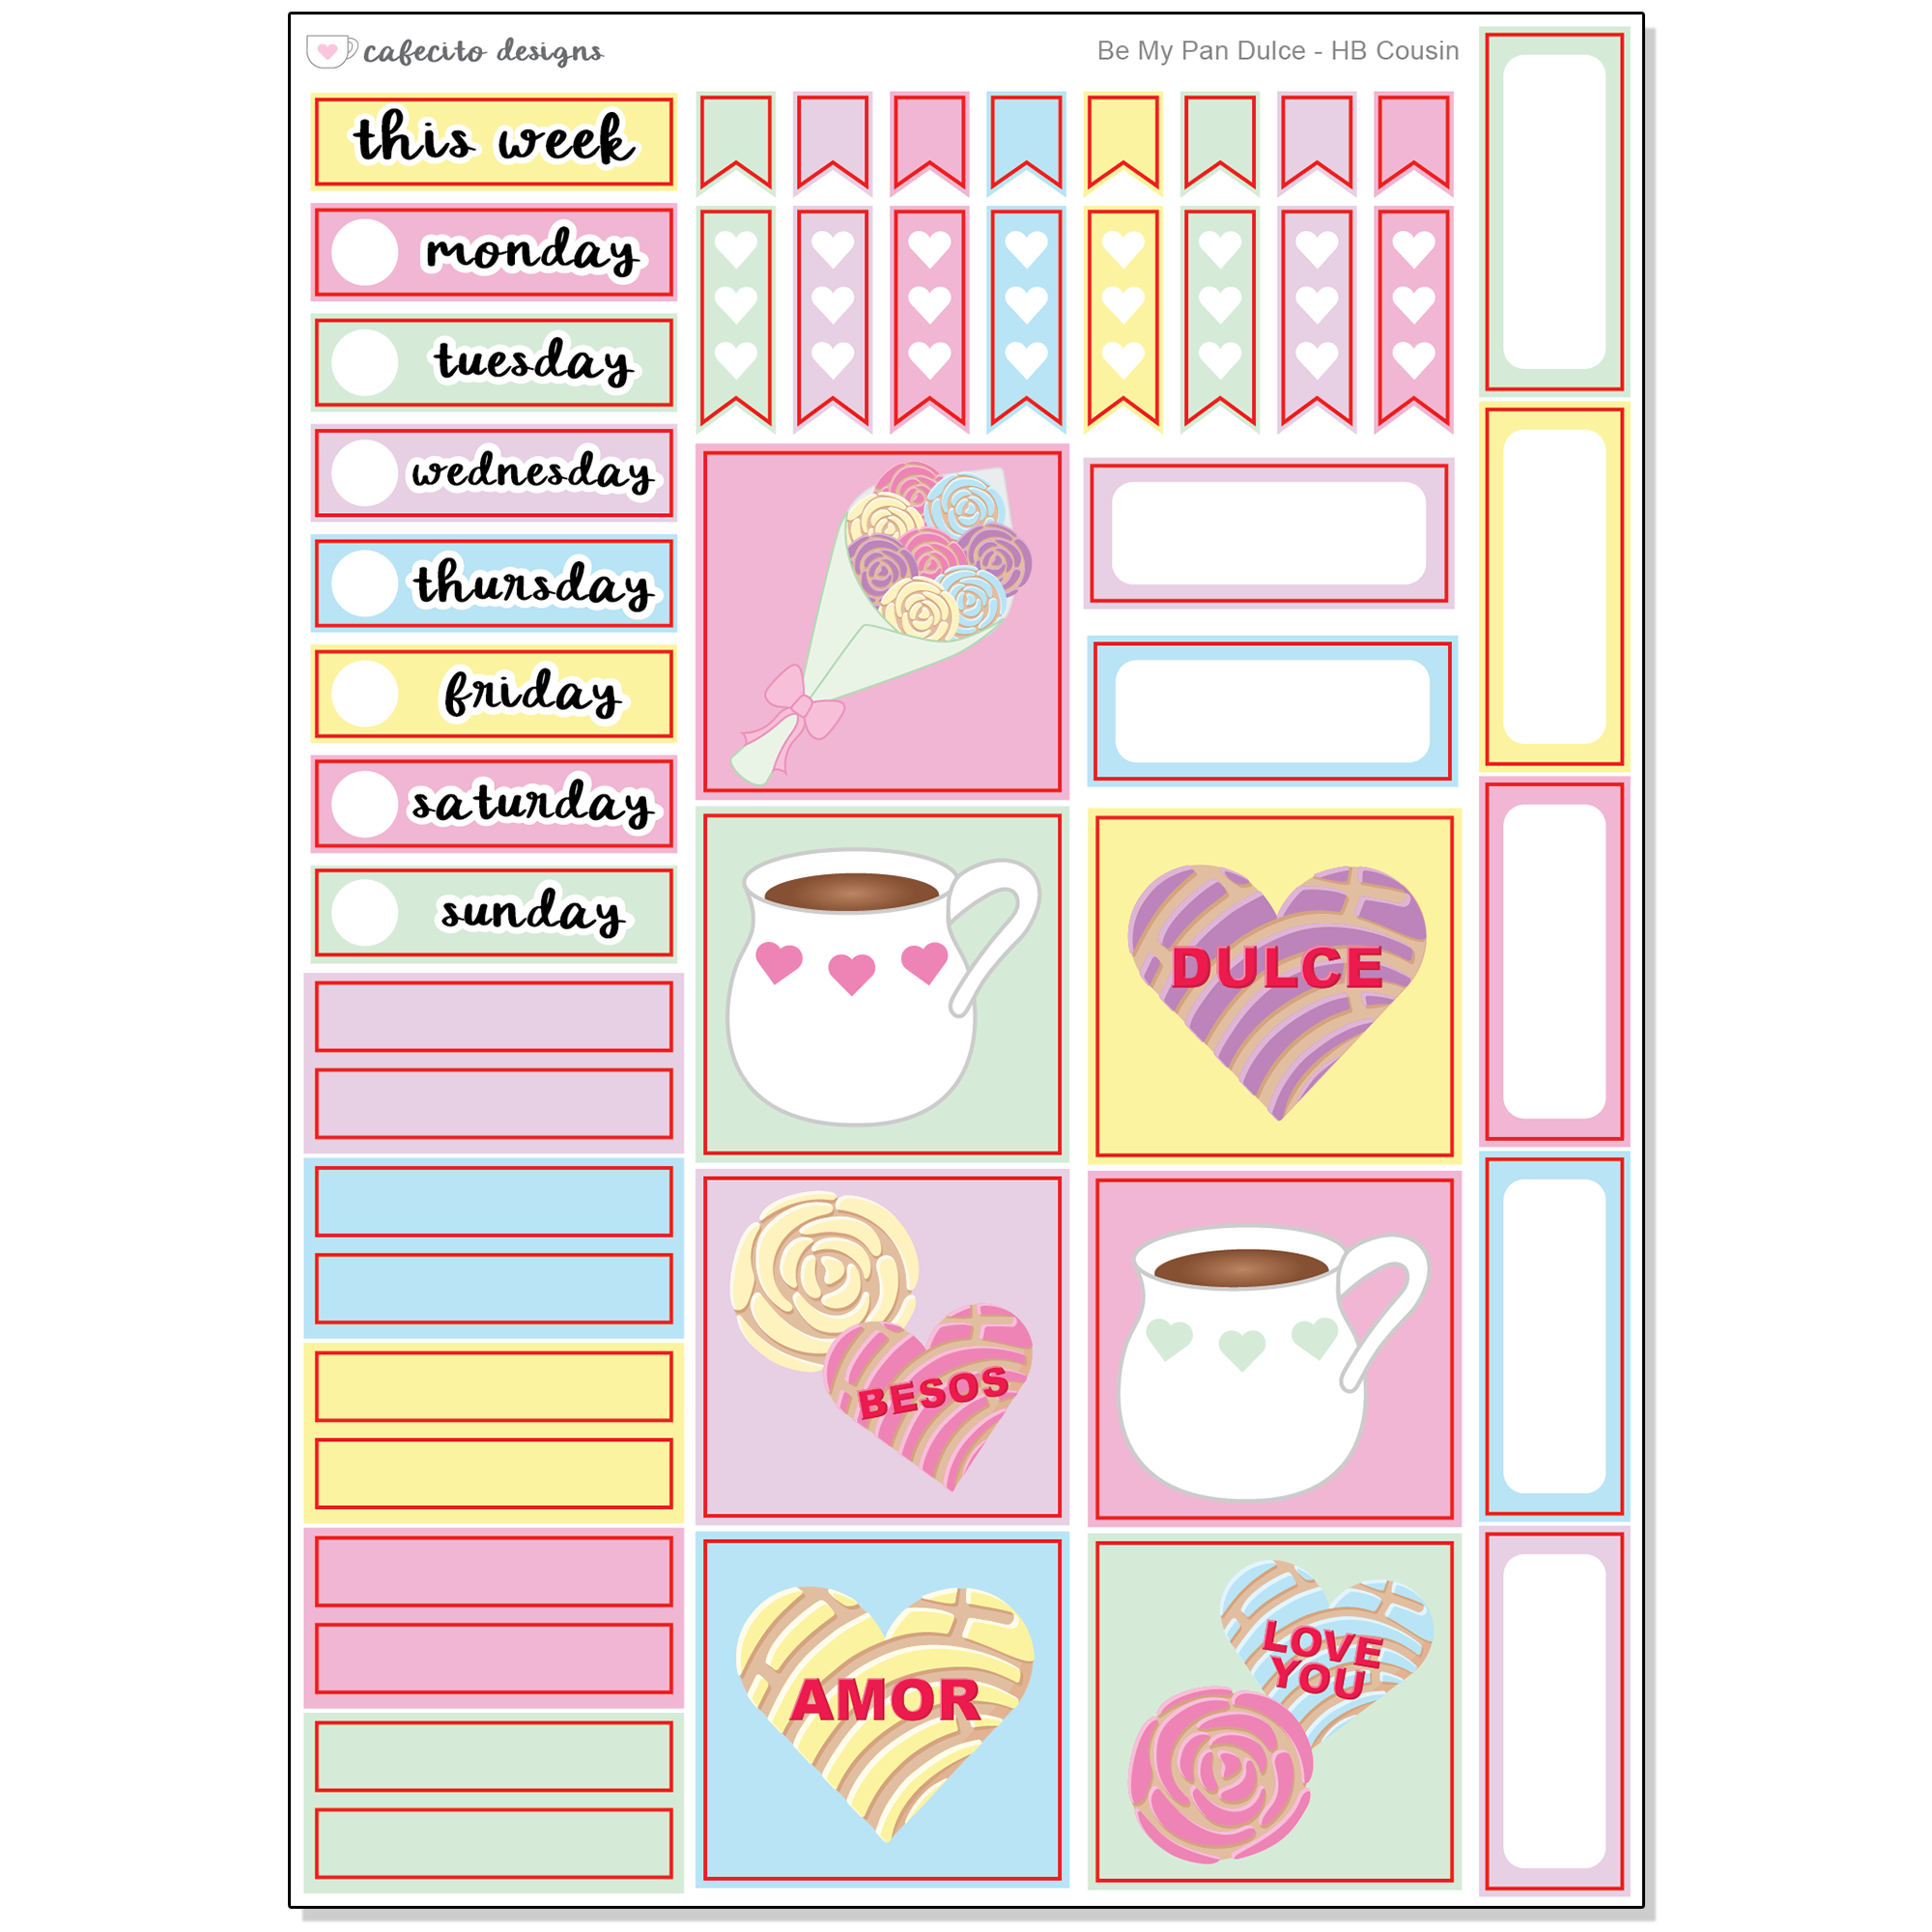 Be My Pan Dulce - Hobonichi COUSIN Functional Stickers